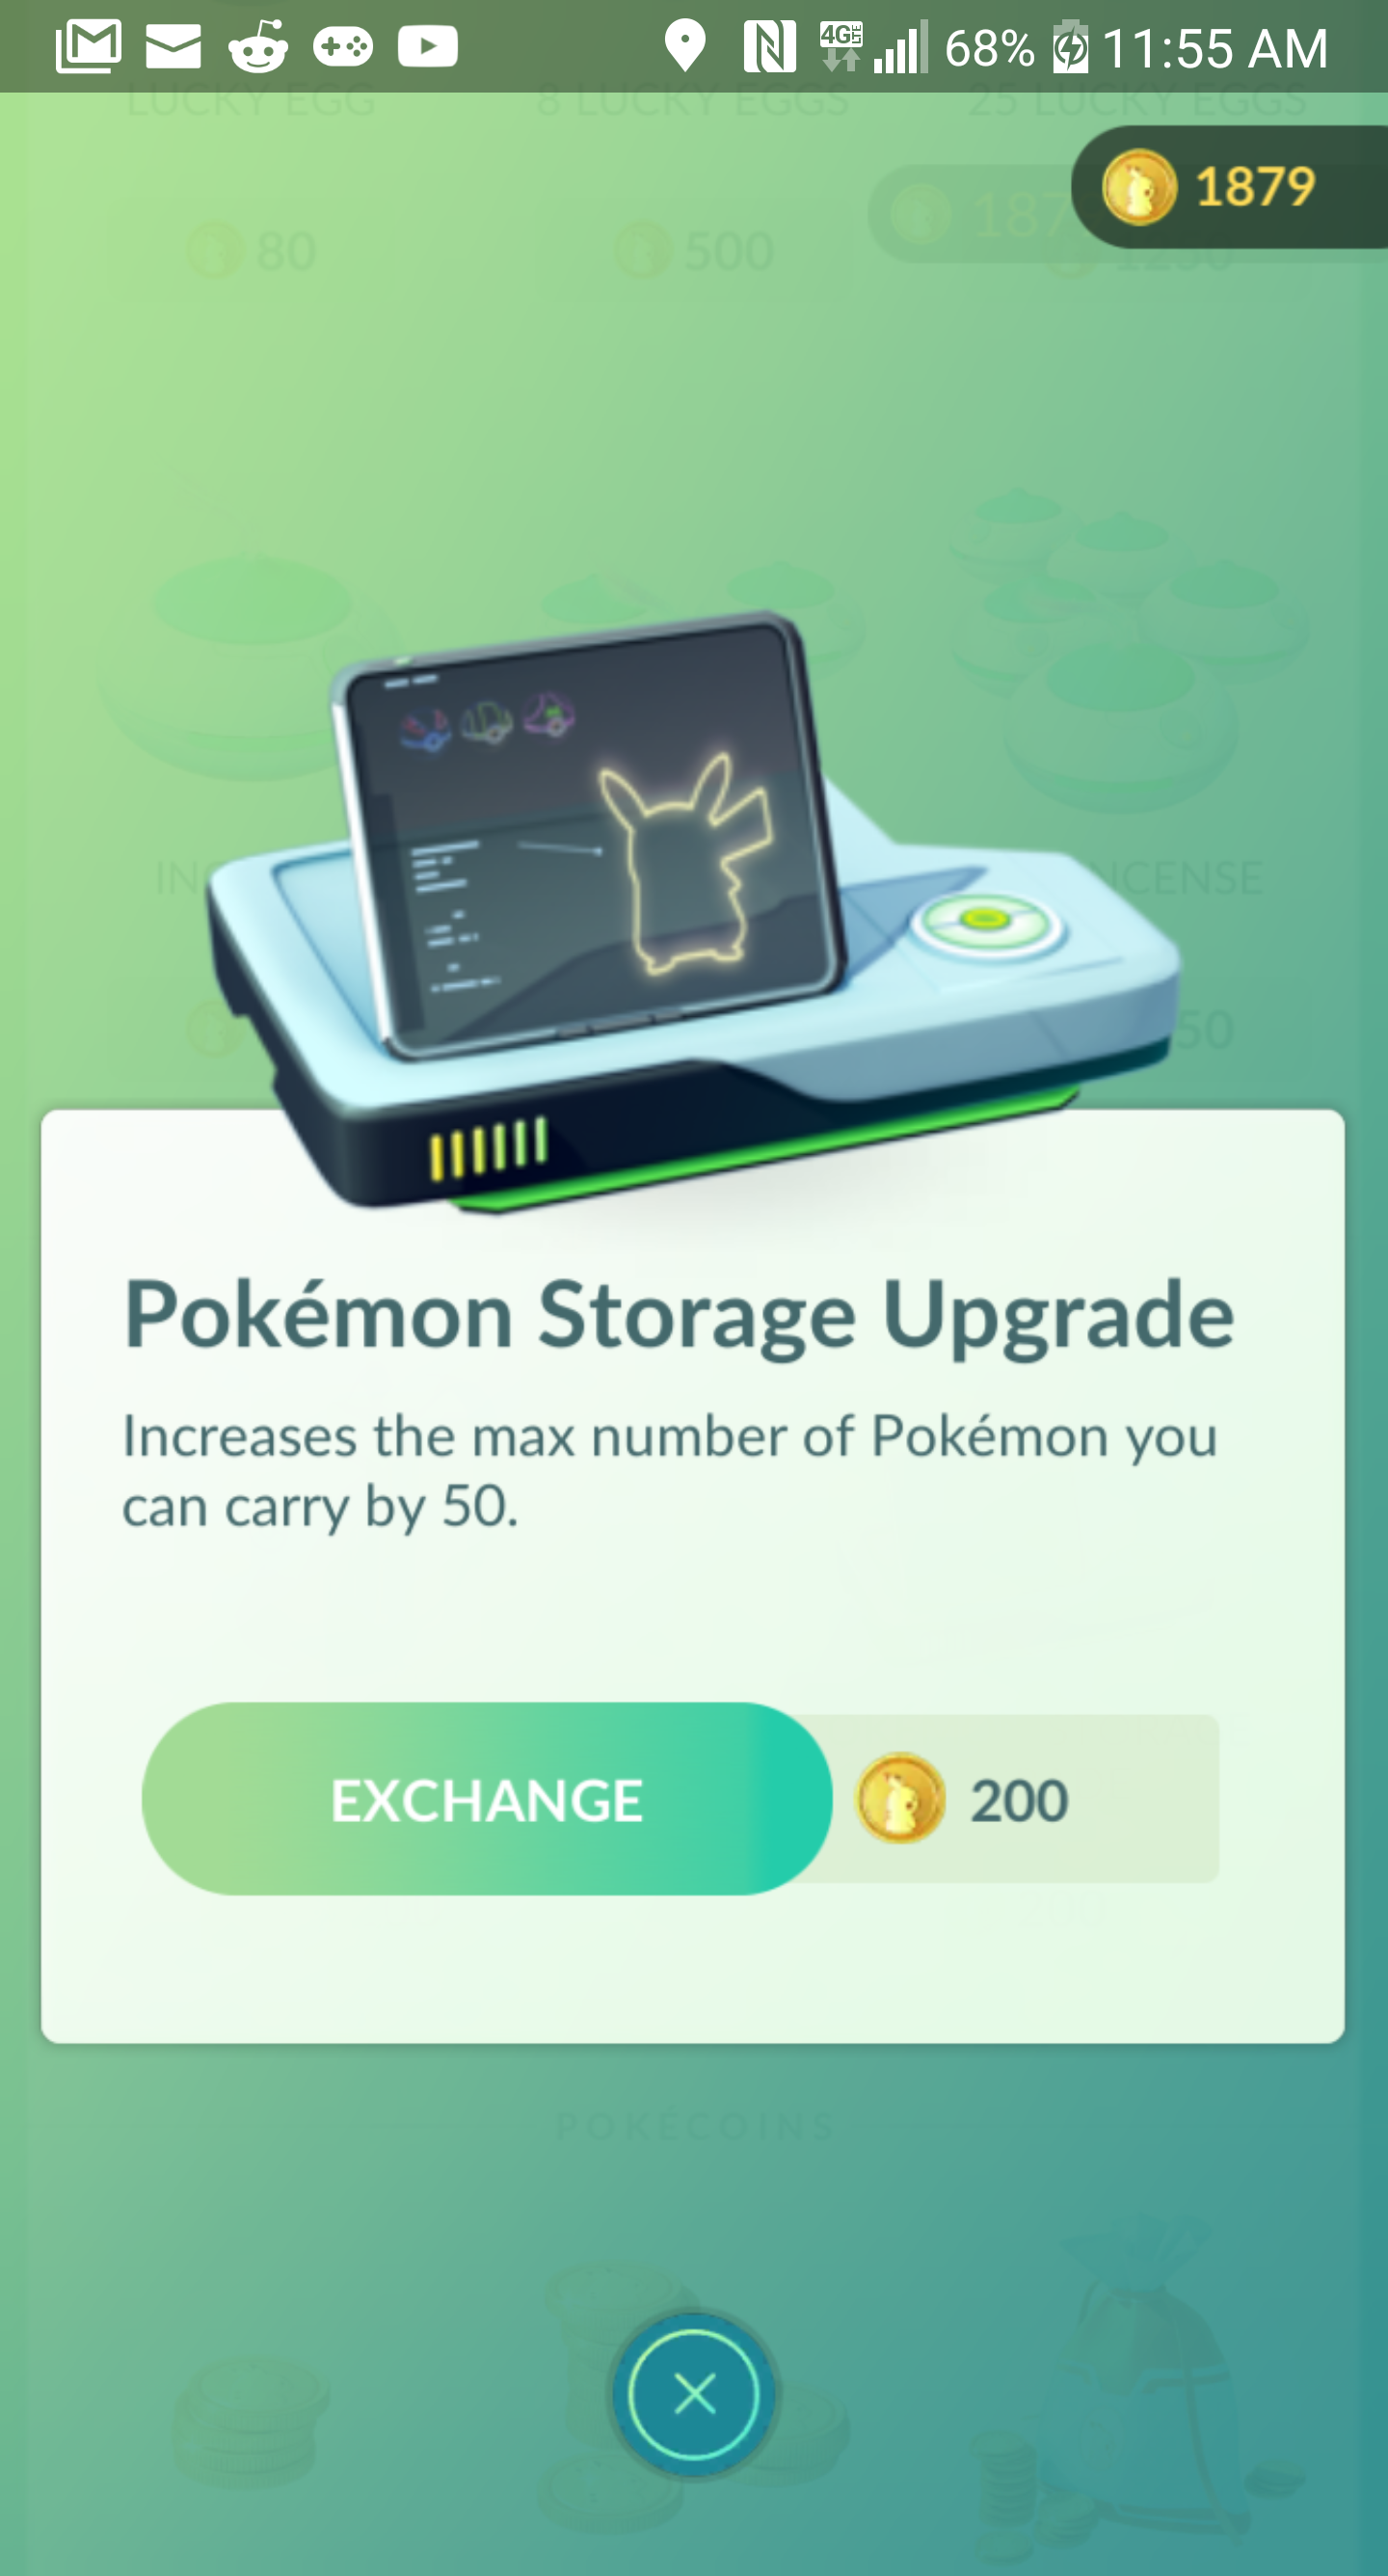 Pokemon storage upgrades purchasable and a free increase ...